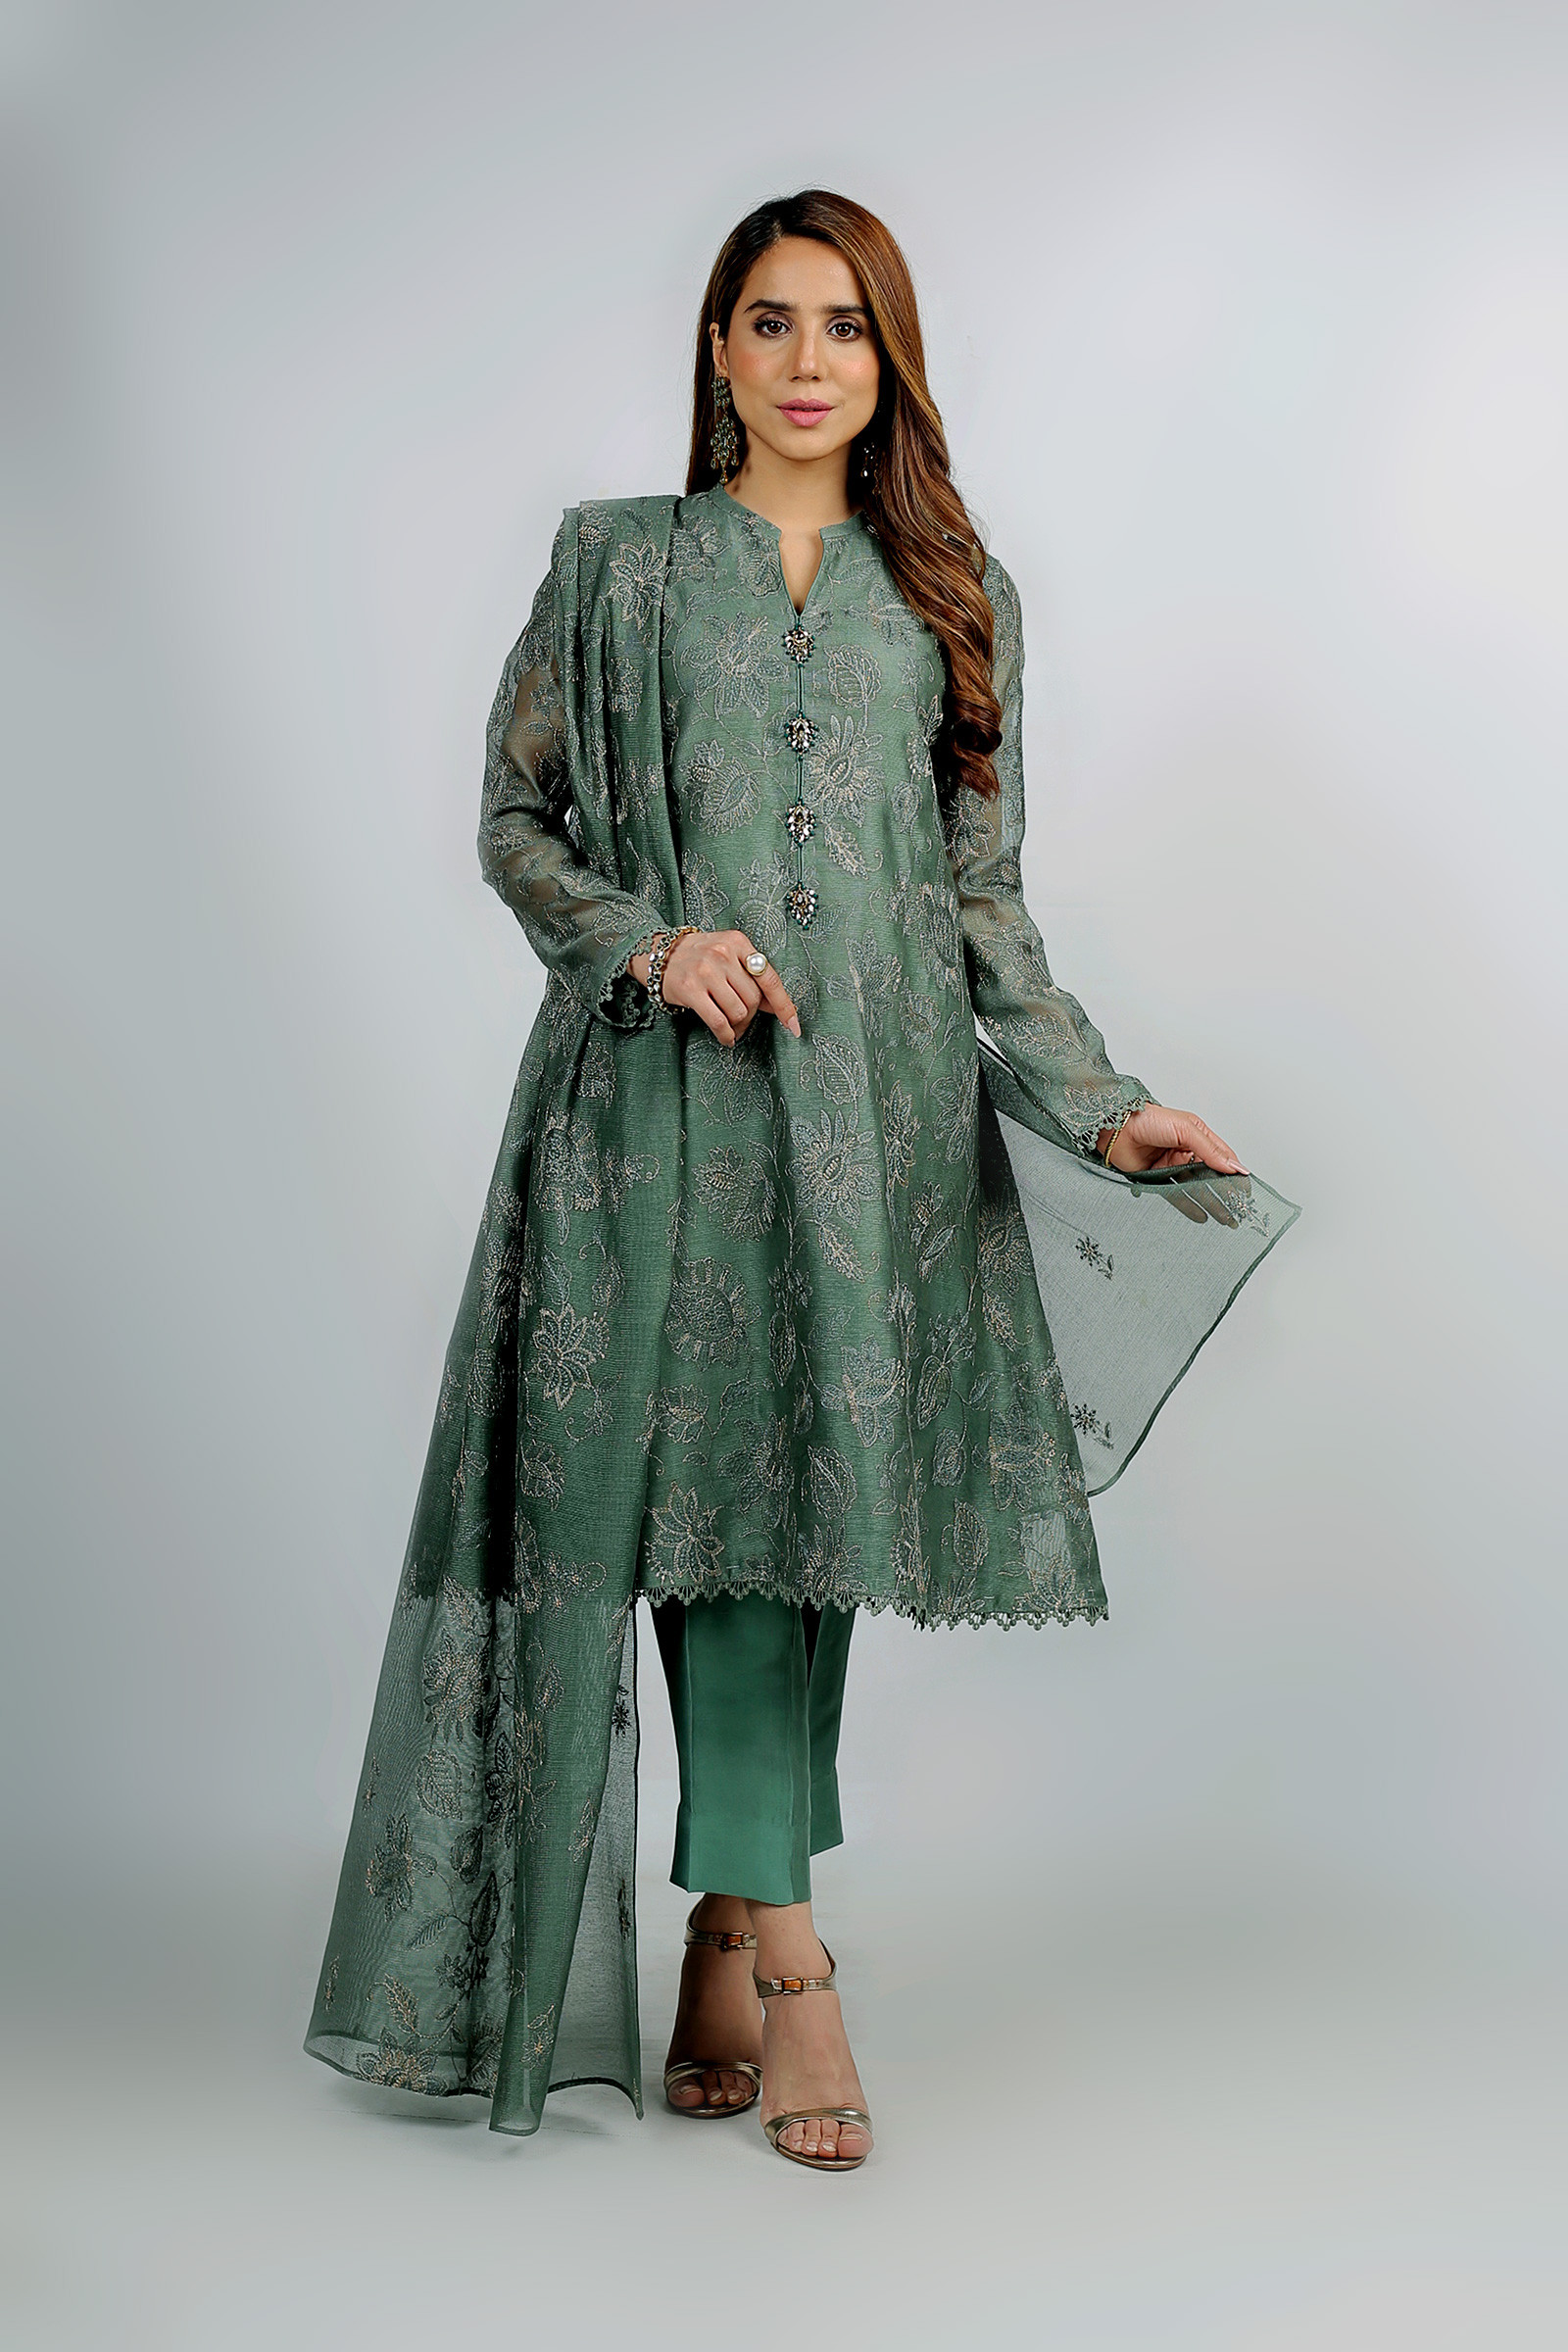 Bareeze Embroidered Net Chandni Rang Suit